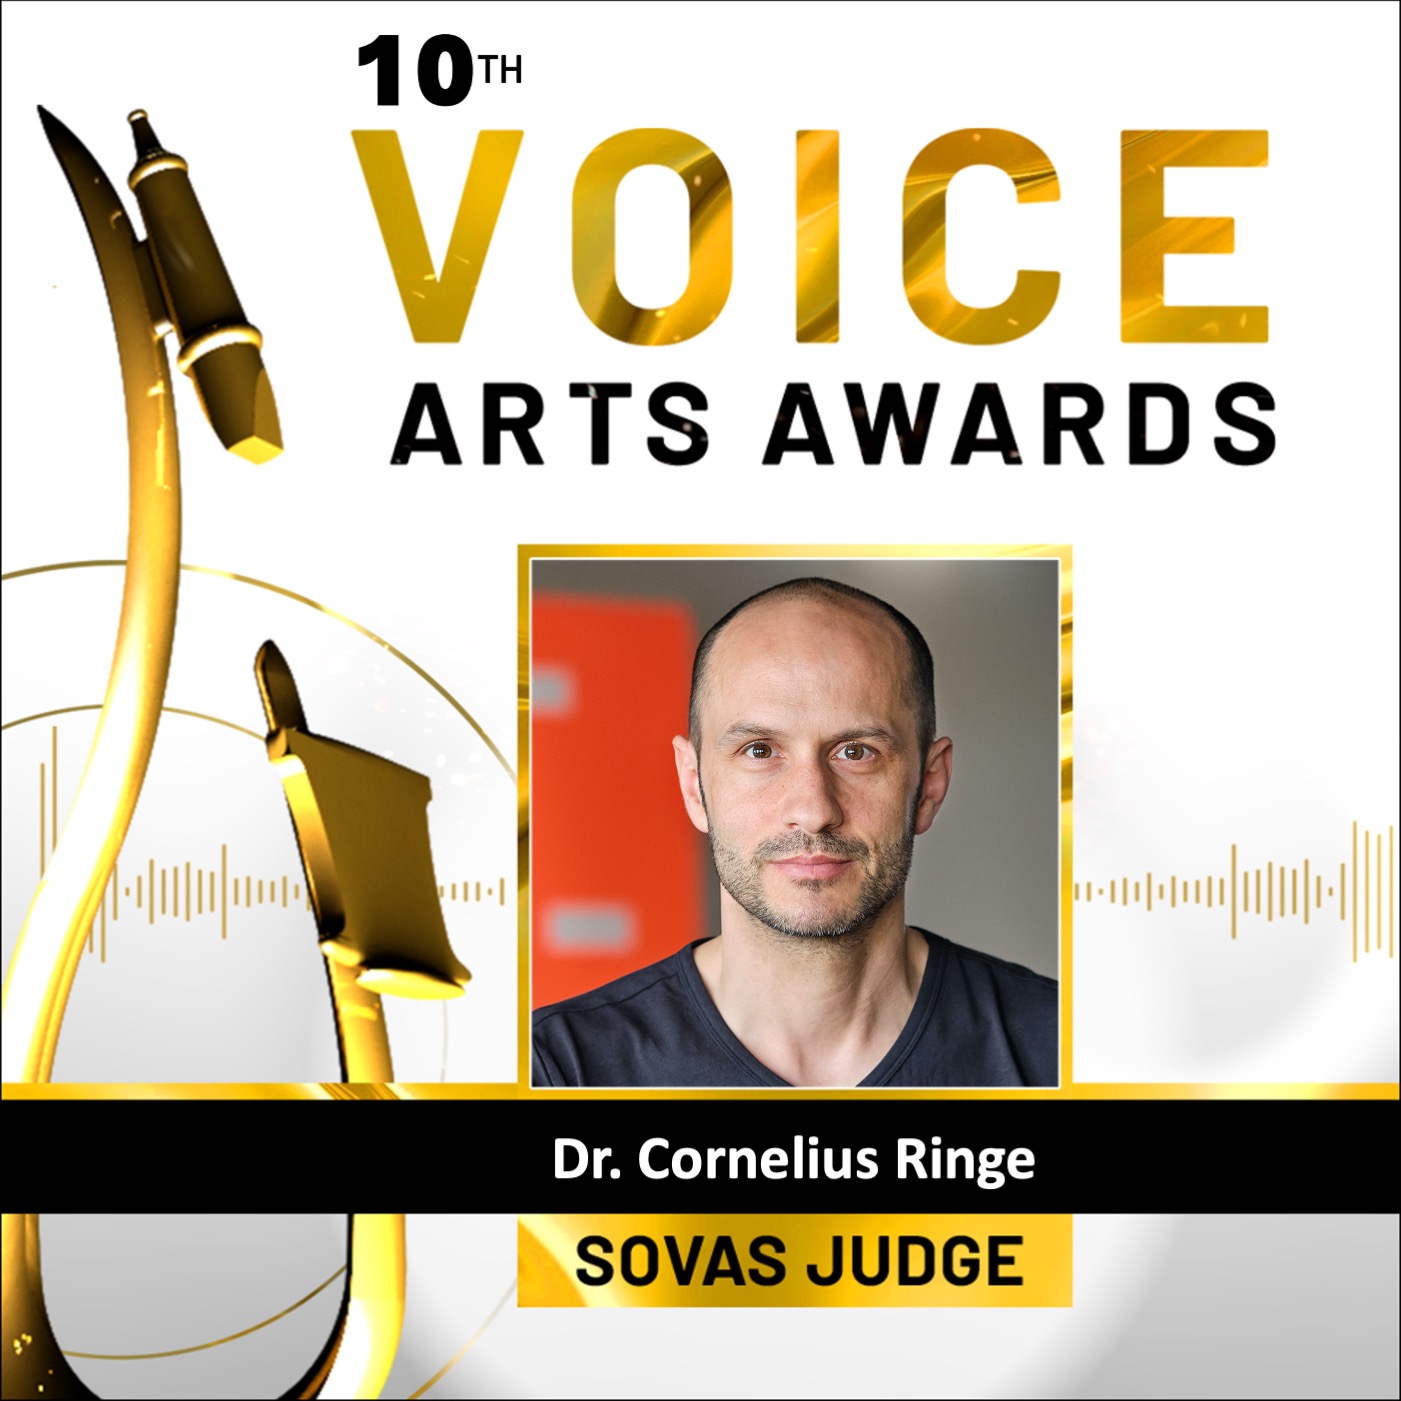 As an expert in (brand) voice, Cornelius Ringe will judge the VOICE ARTS AWARDS, created by SOVAS, which will be hosted in L.A. in December 2023.